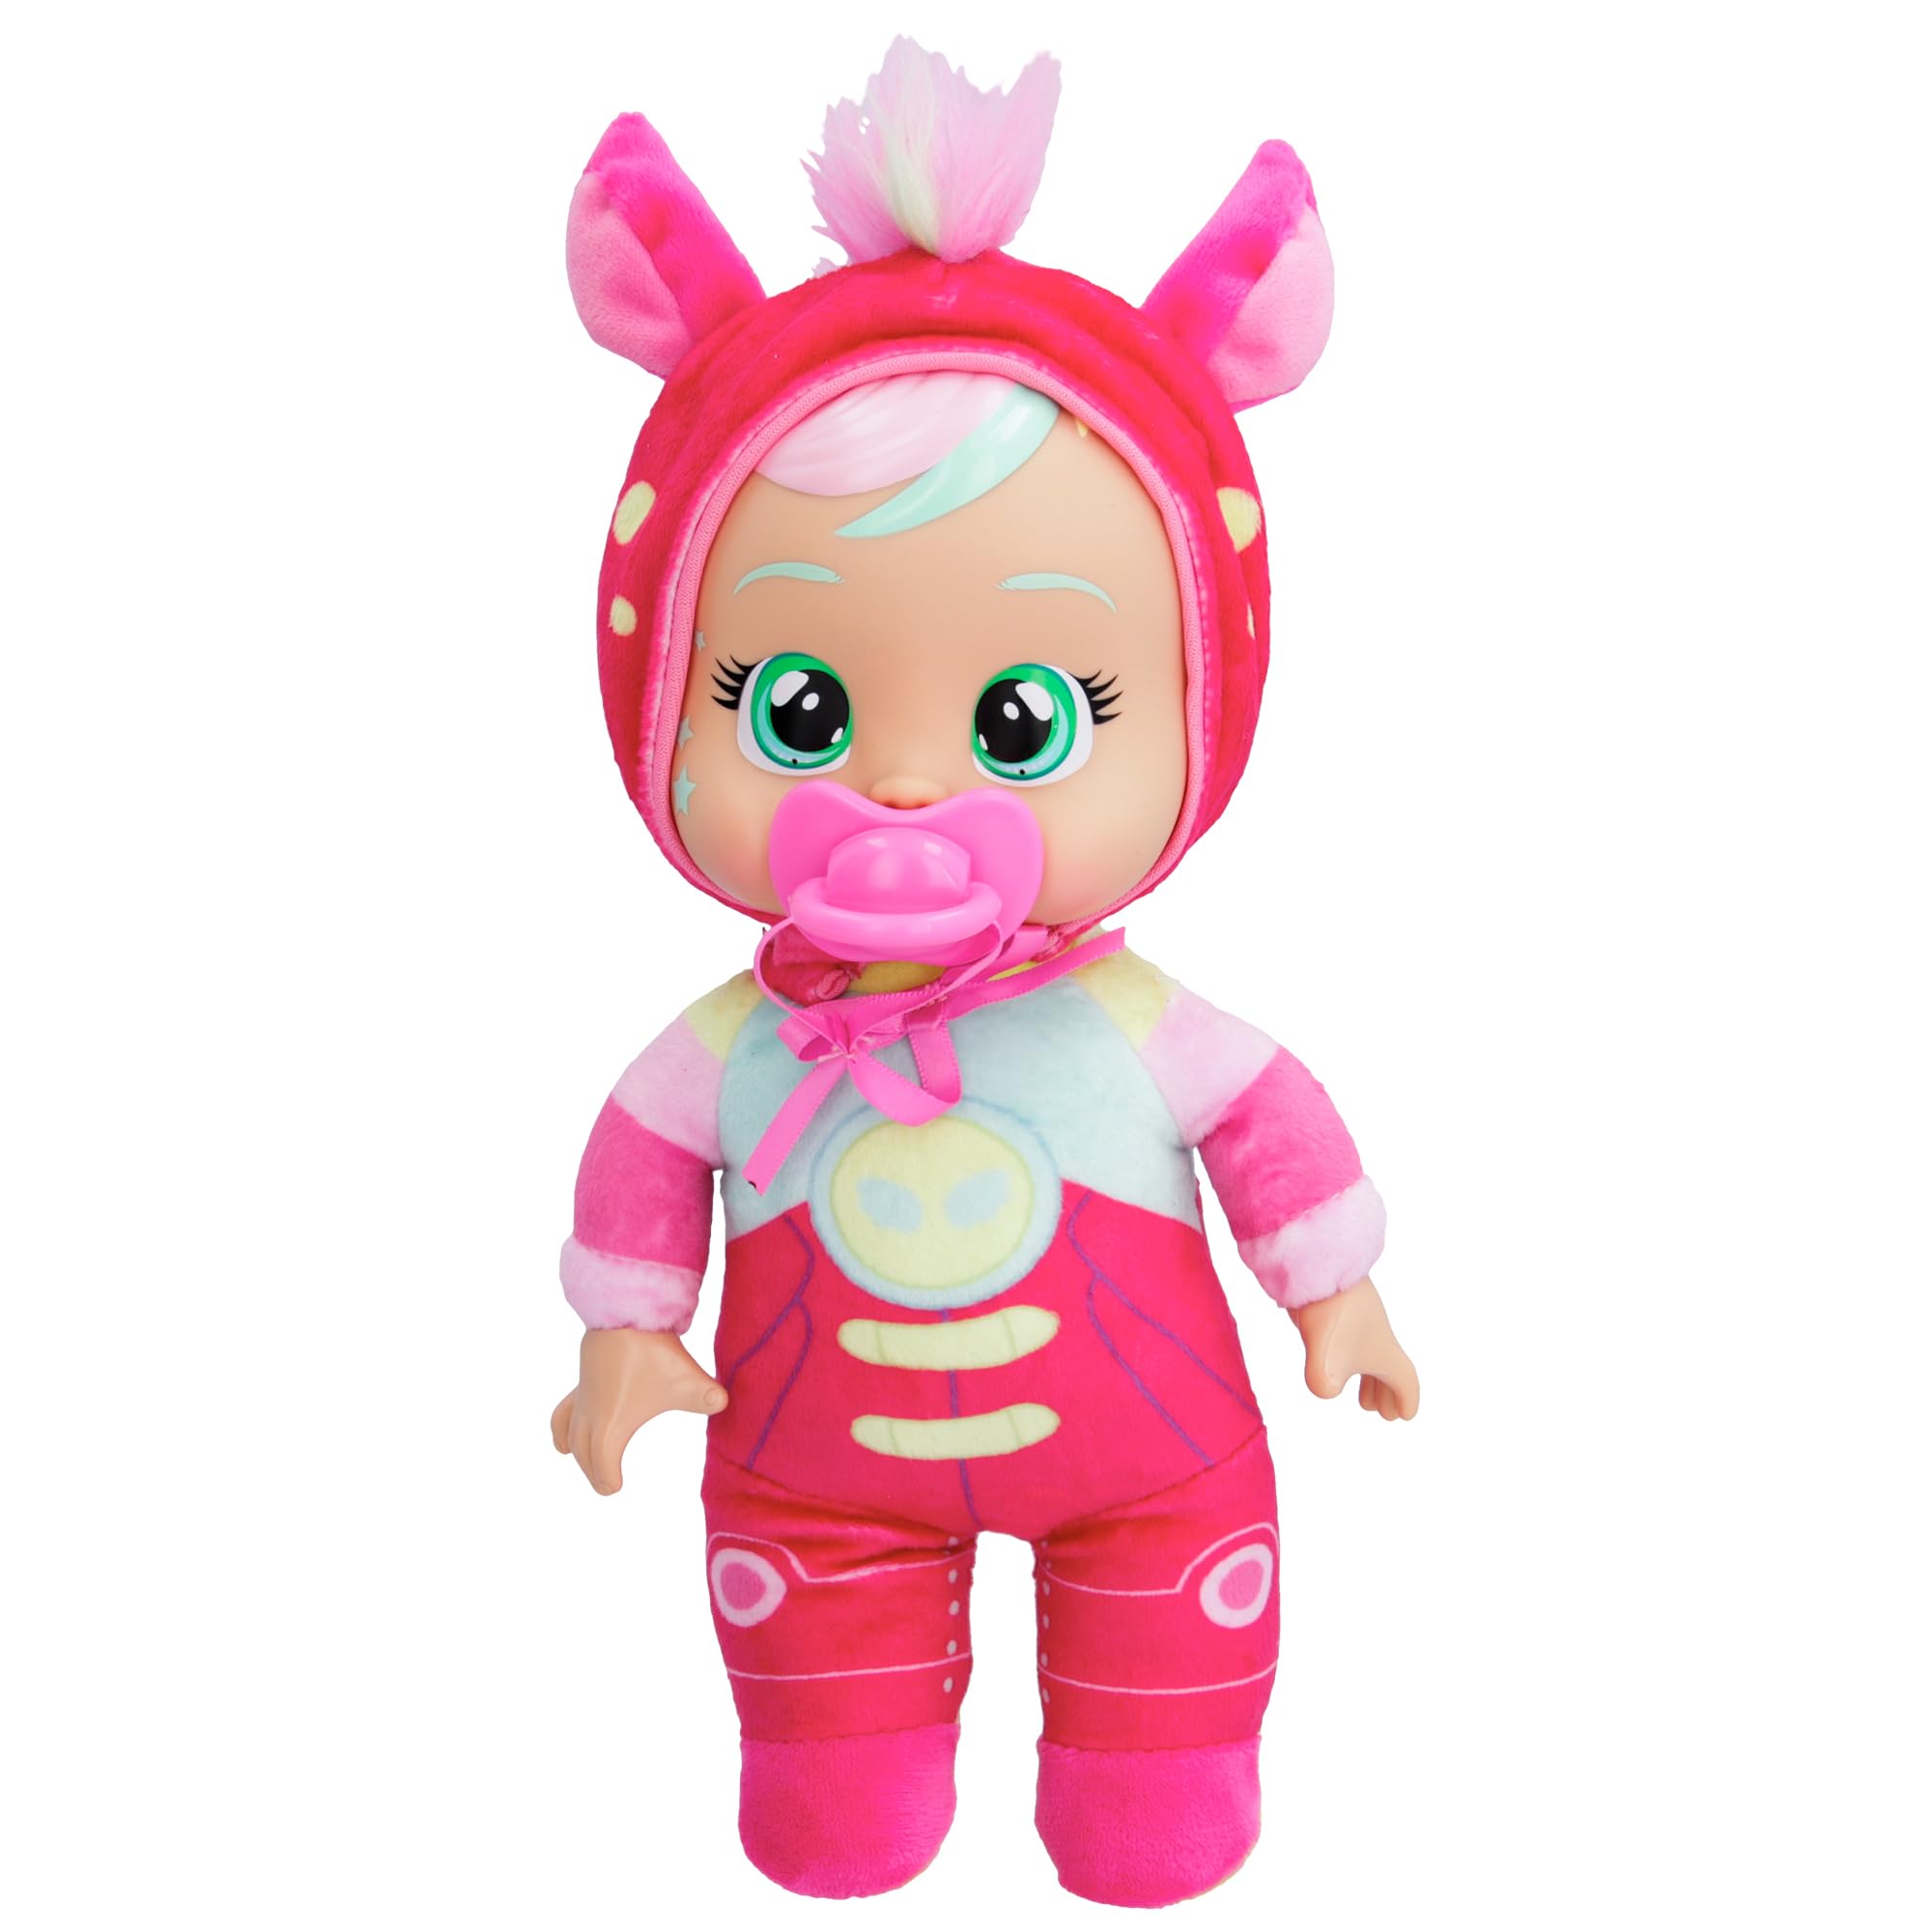 Cry Babies Tiny Cuddles Talents Hannah, Dressed Up As an Astronaut and Cries Real Tears, 9 Inch Baby Doll